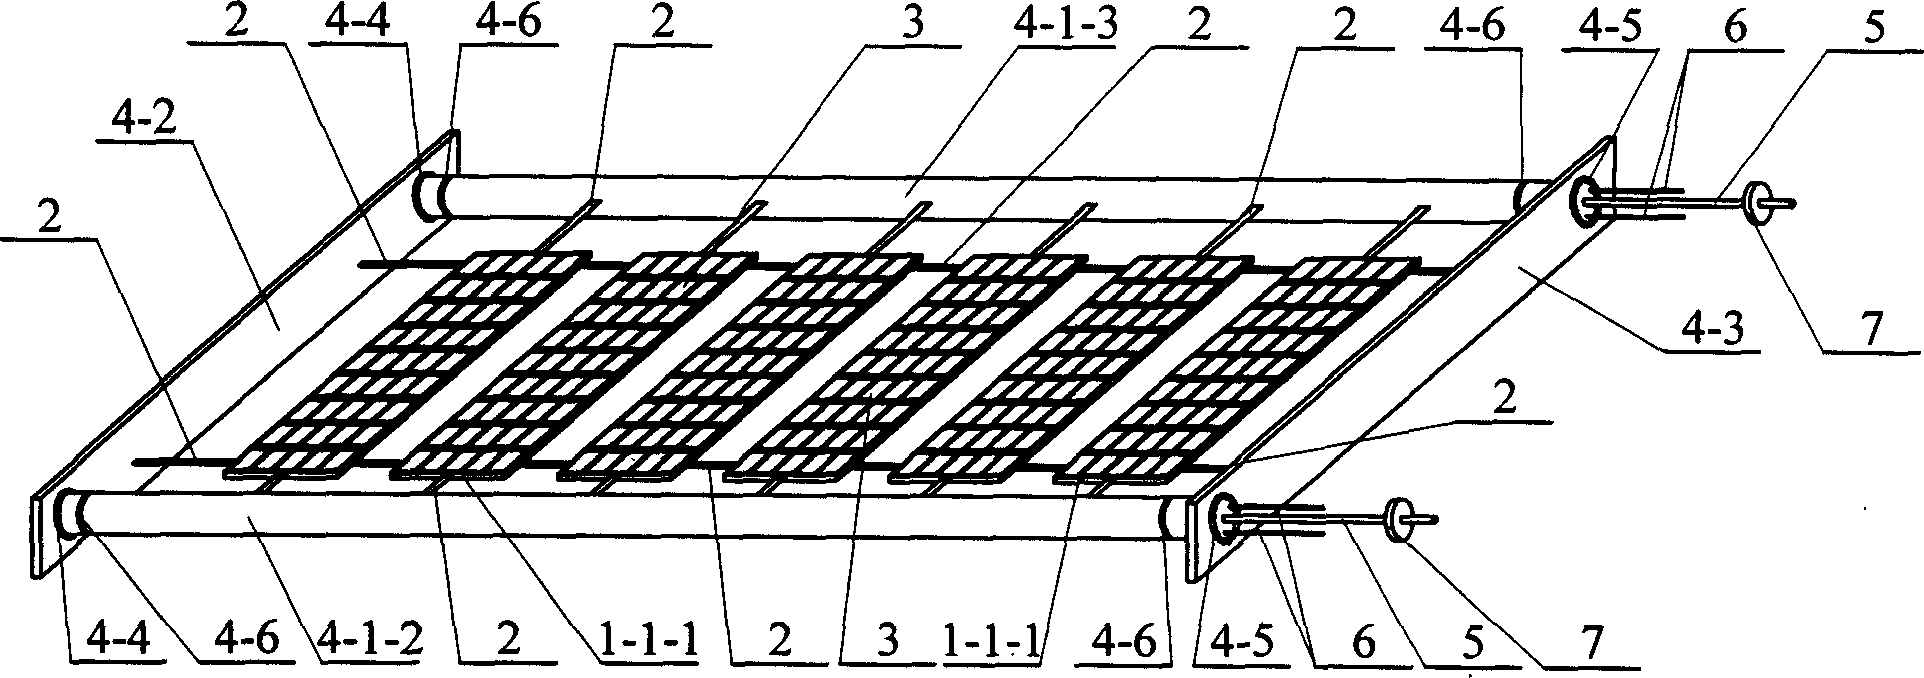 Plane framework supporting structure capable of steel charge expansion